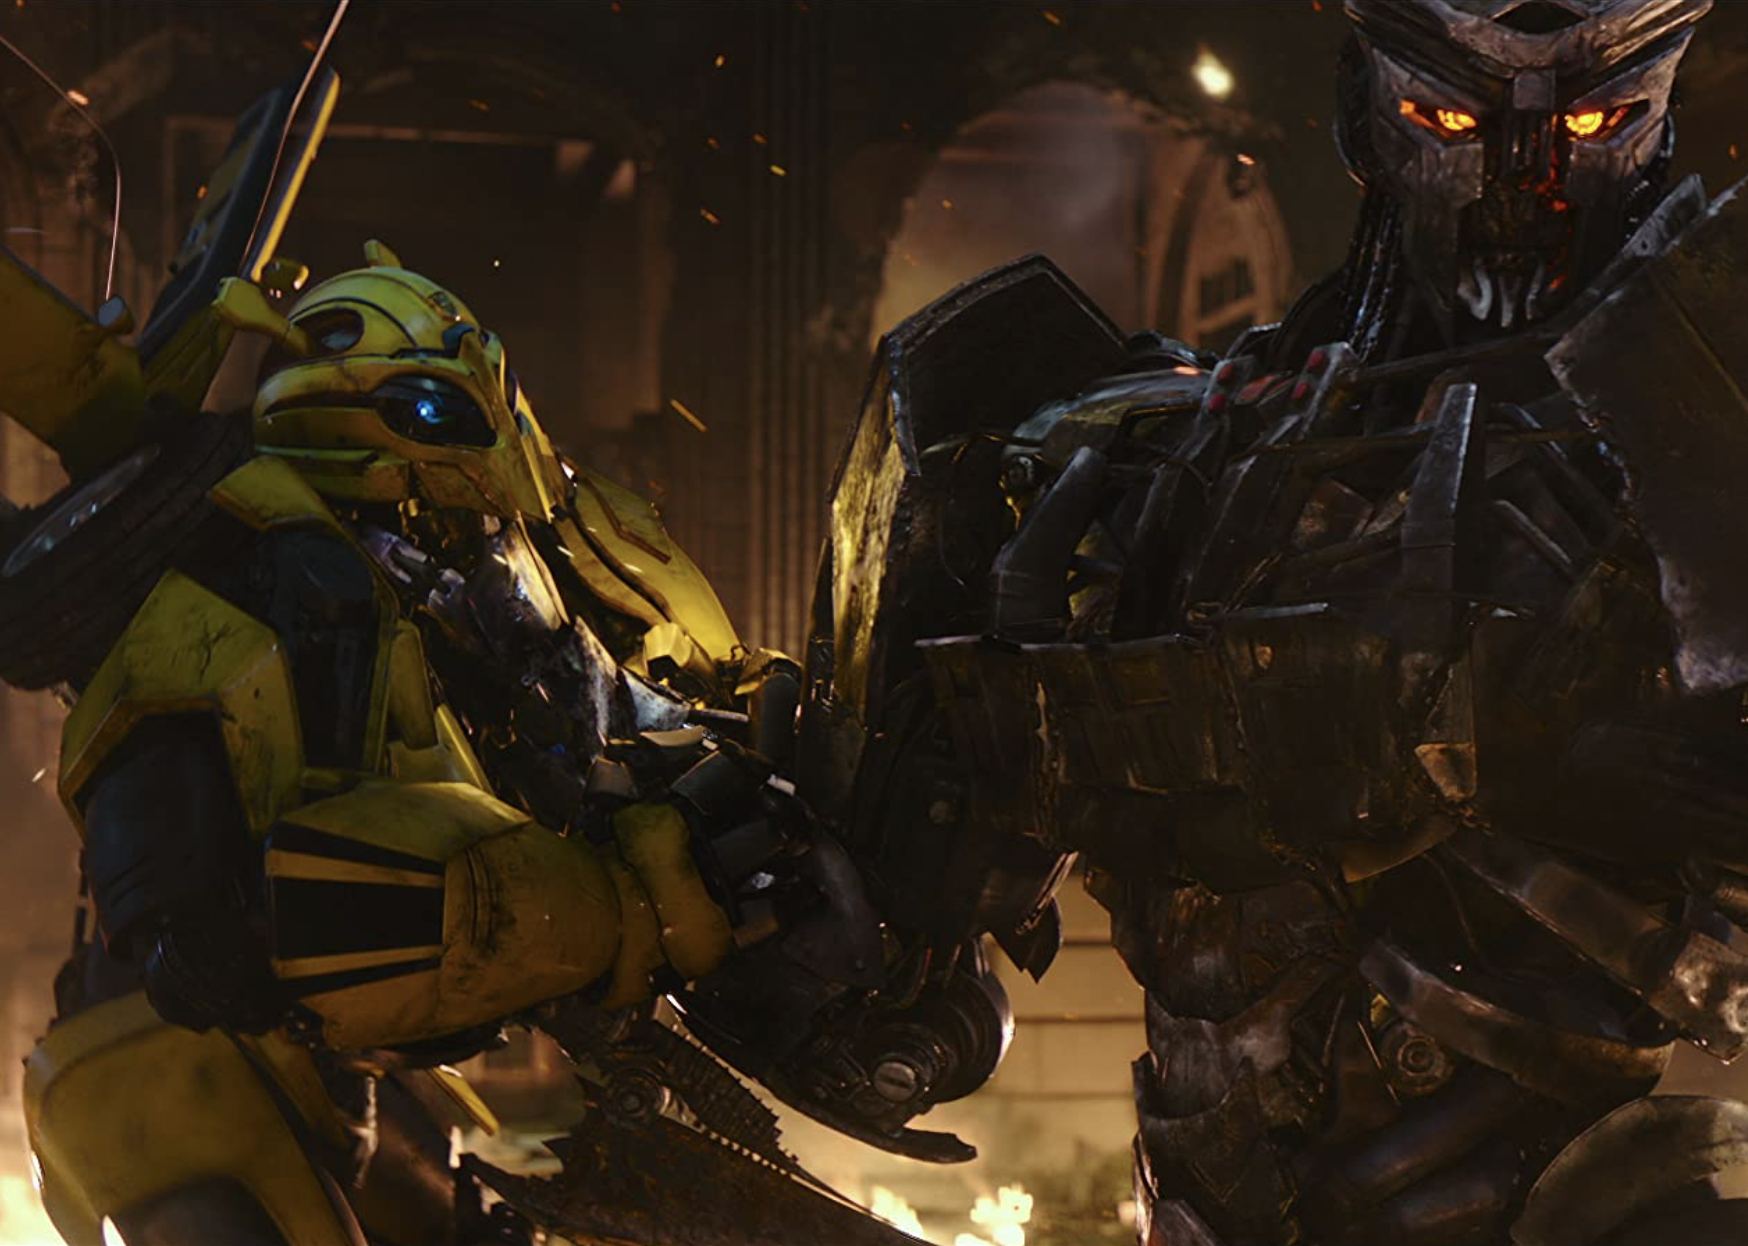 A scene from "Transformers: Rise of the Beasts".